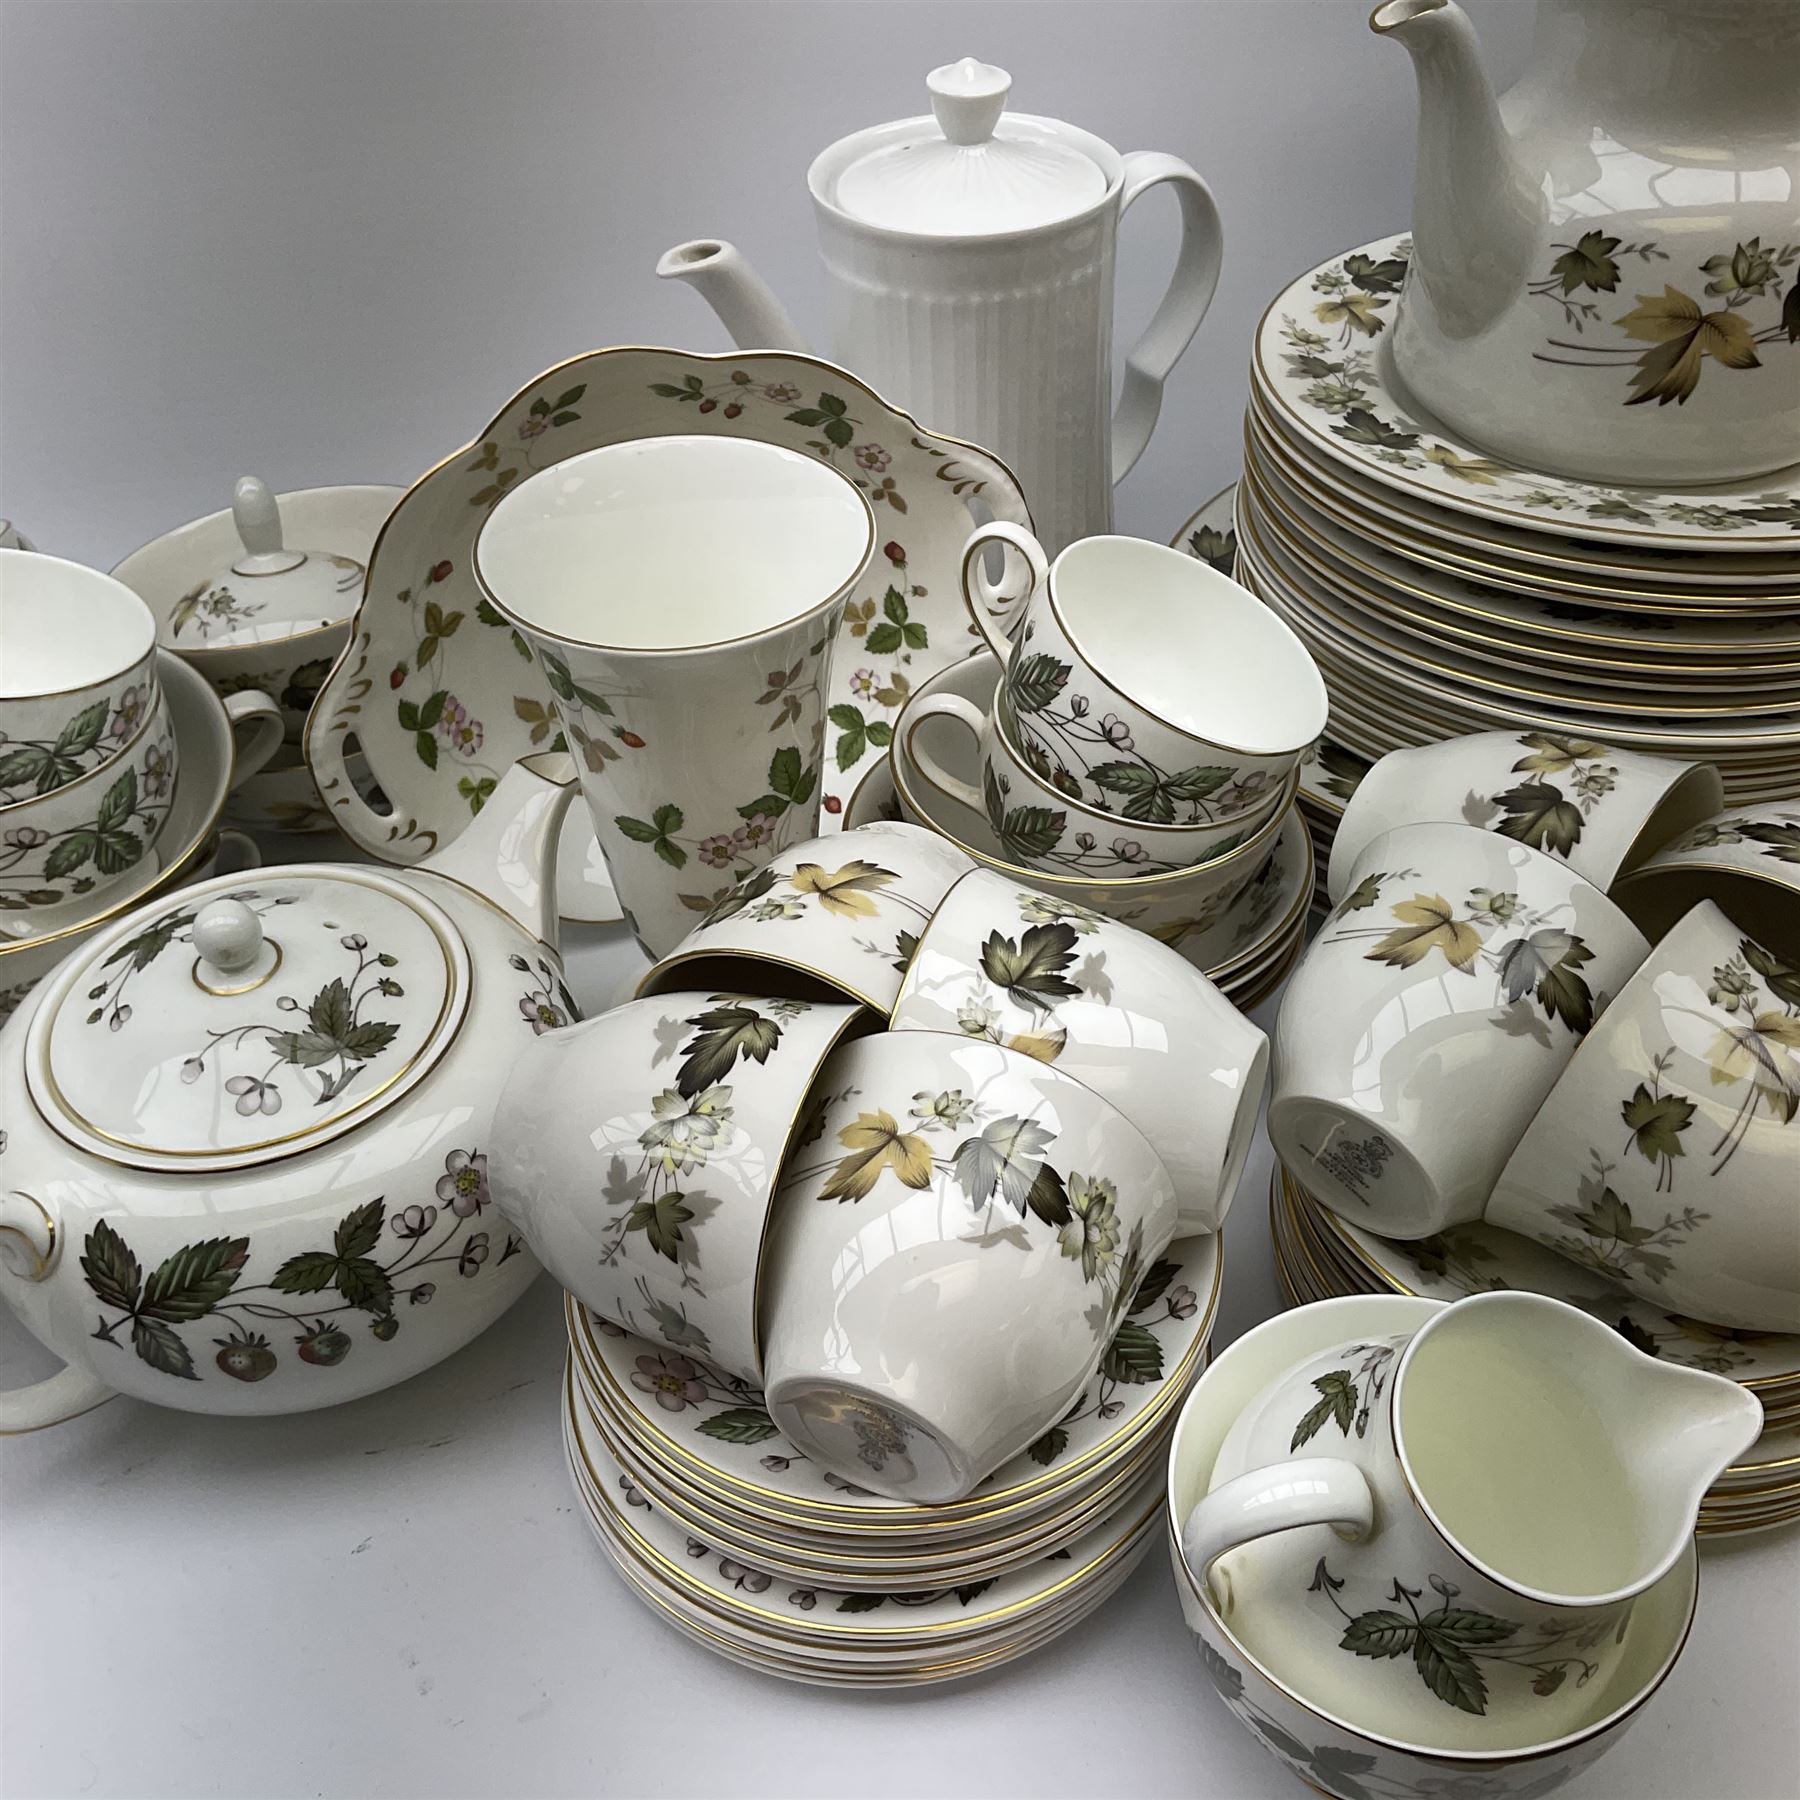 Royal Doulton Larchmont pattern tea and dinner wares - Image 2 of 4